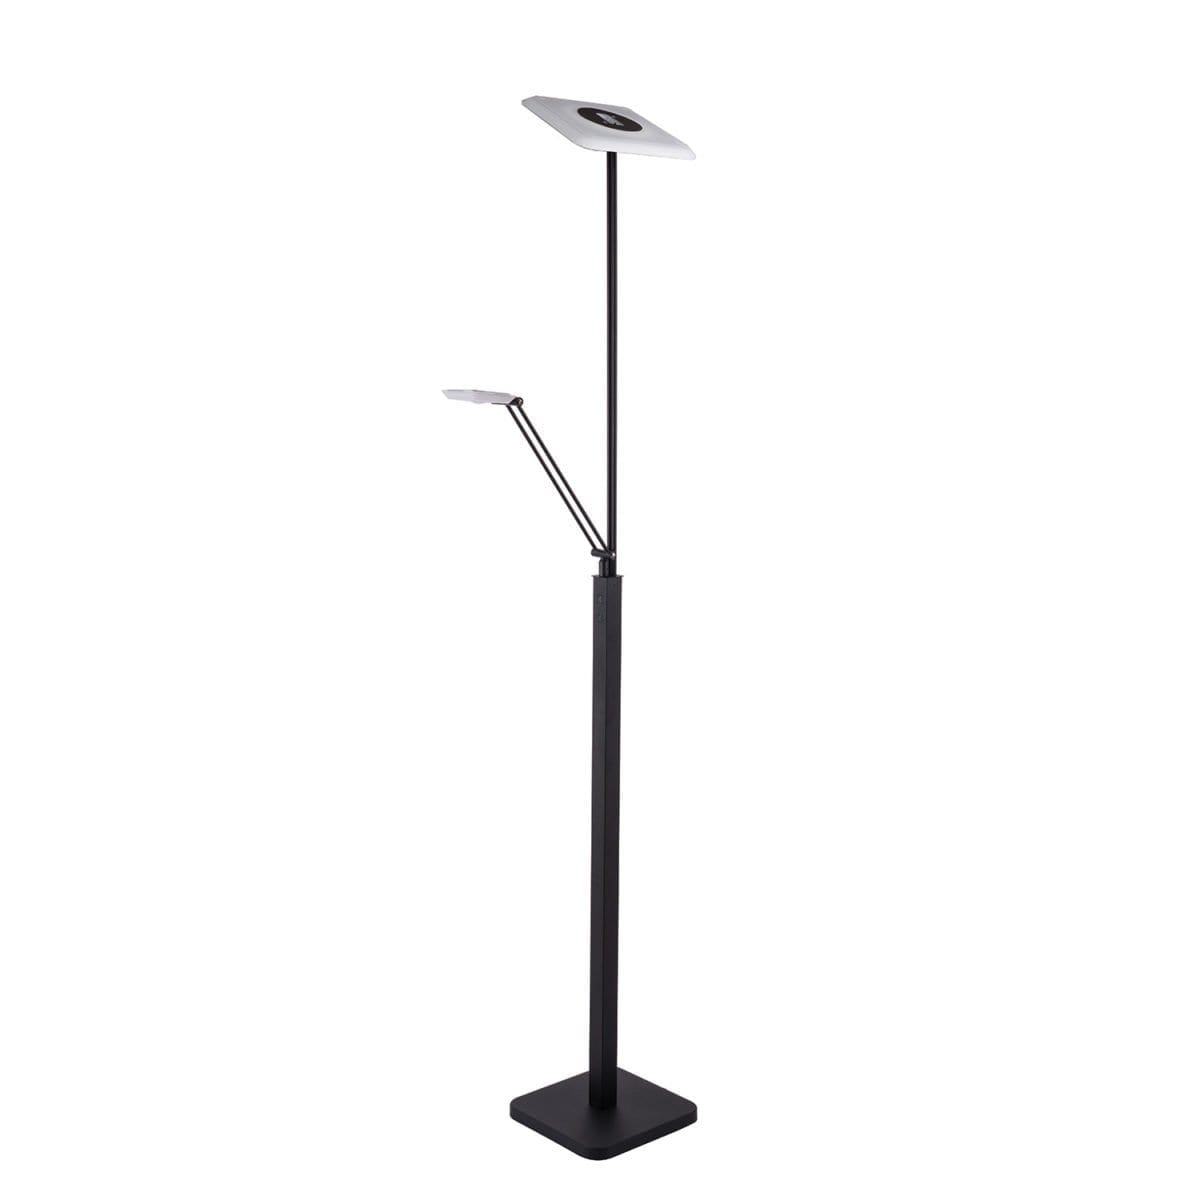 148 FL5020 BLK
LED Torchiere With Reading Light
Available in Black or Satin Nickle
Regular Price $226.99
Sale Price $158.99